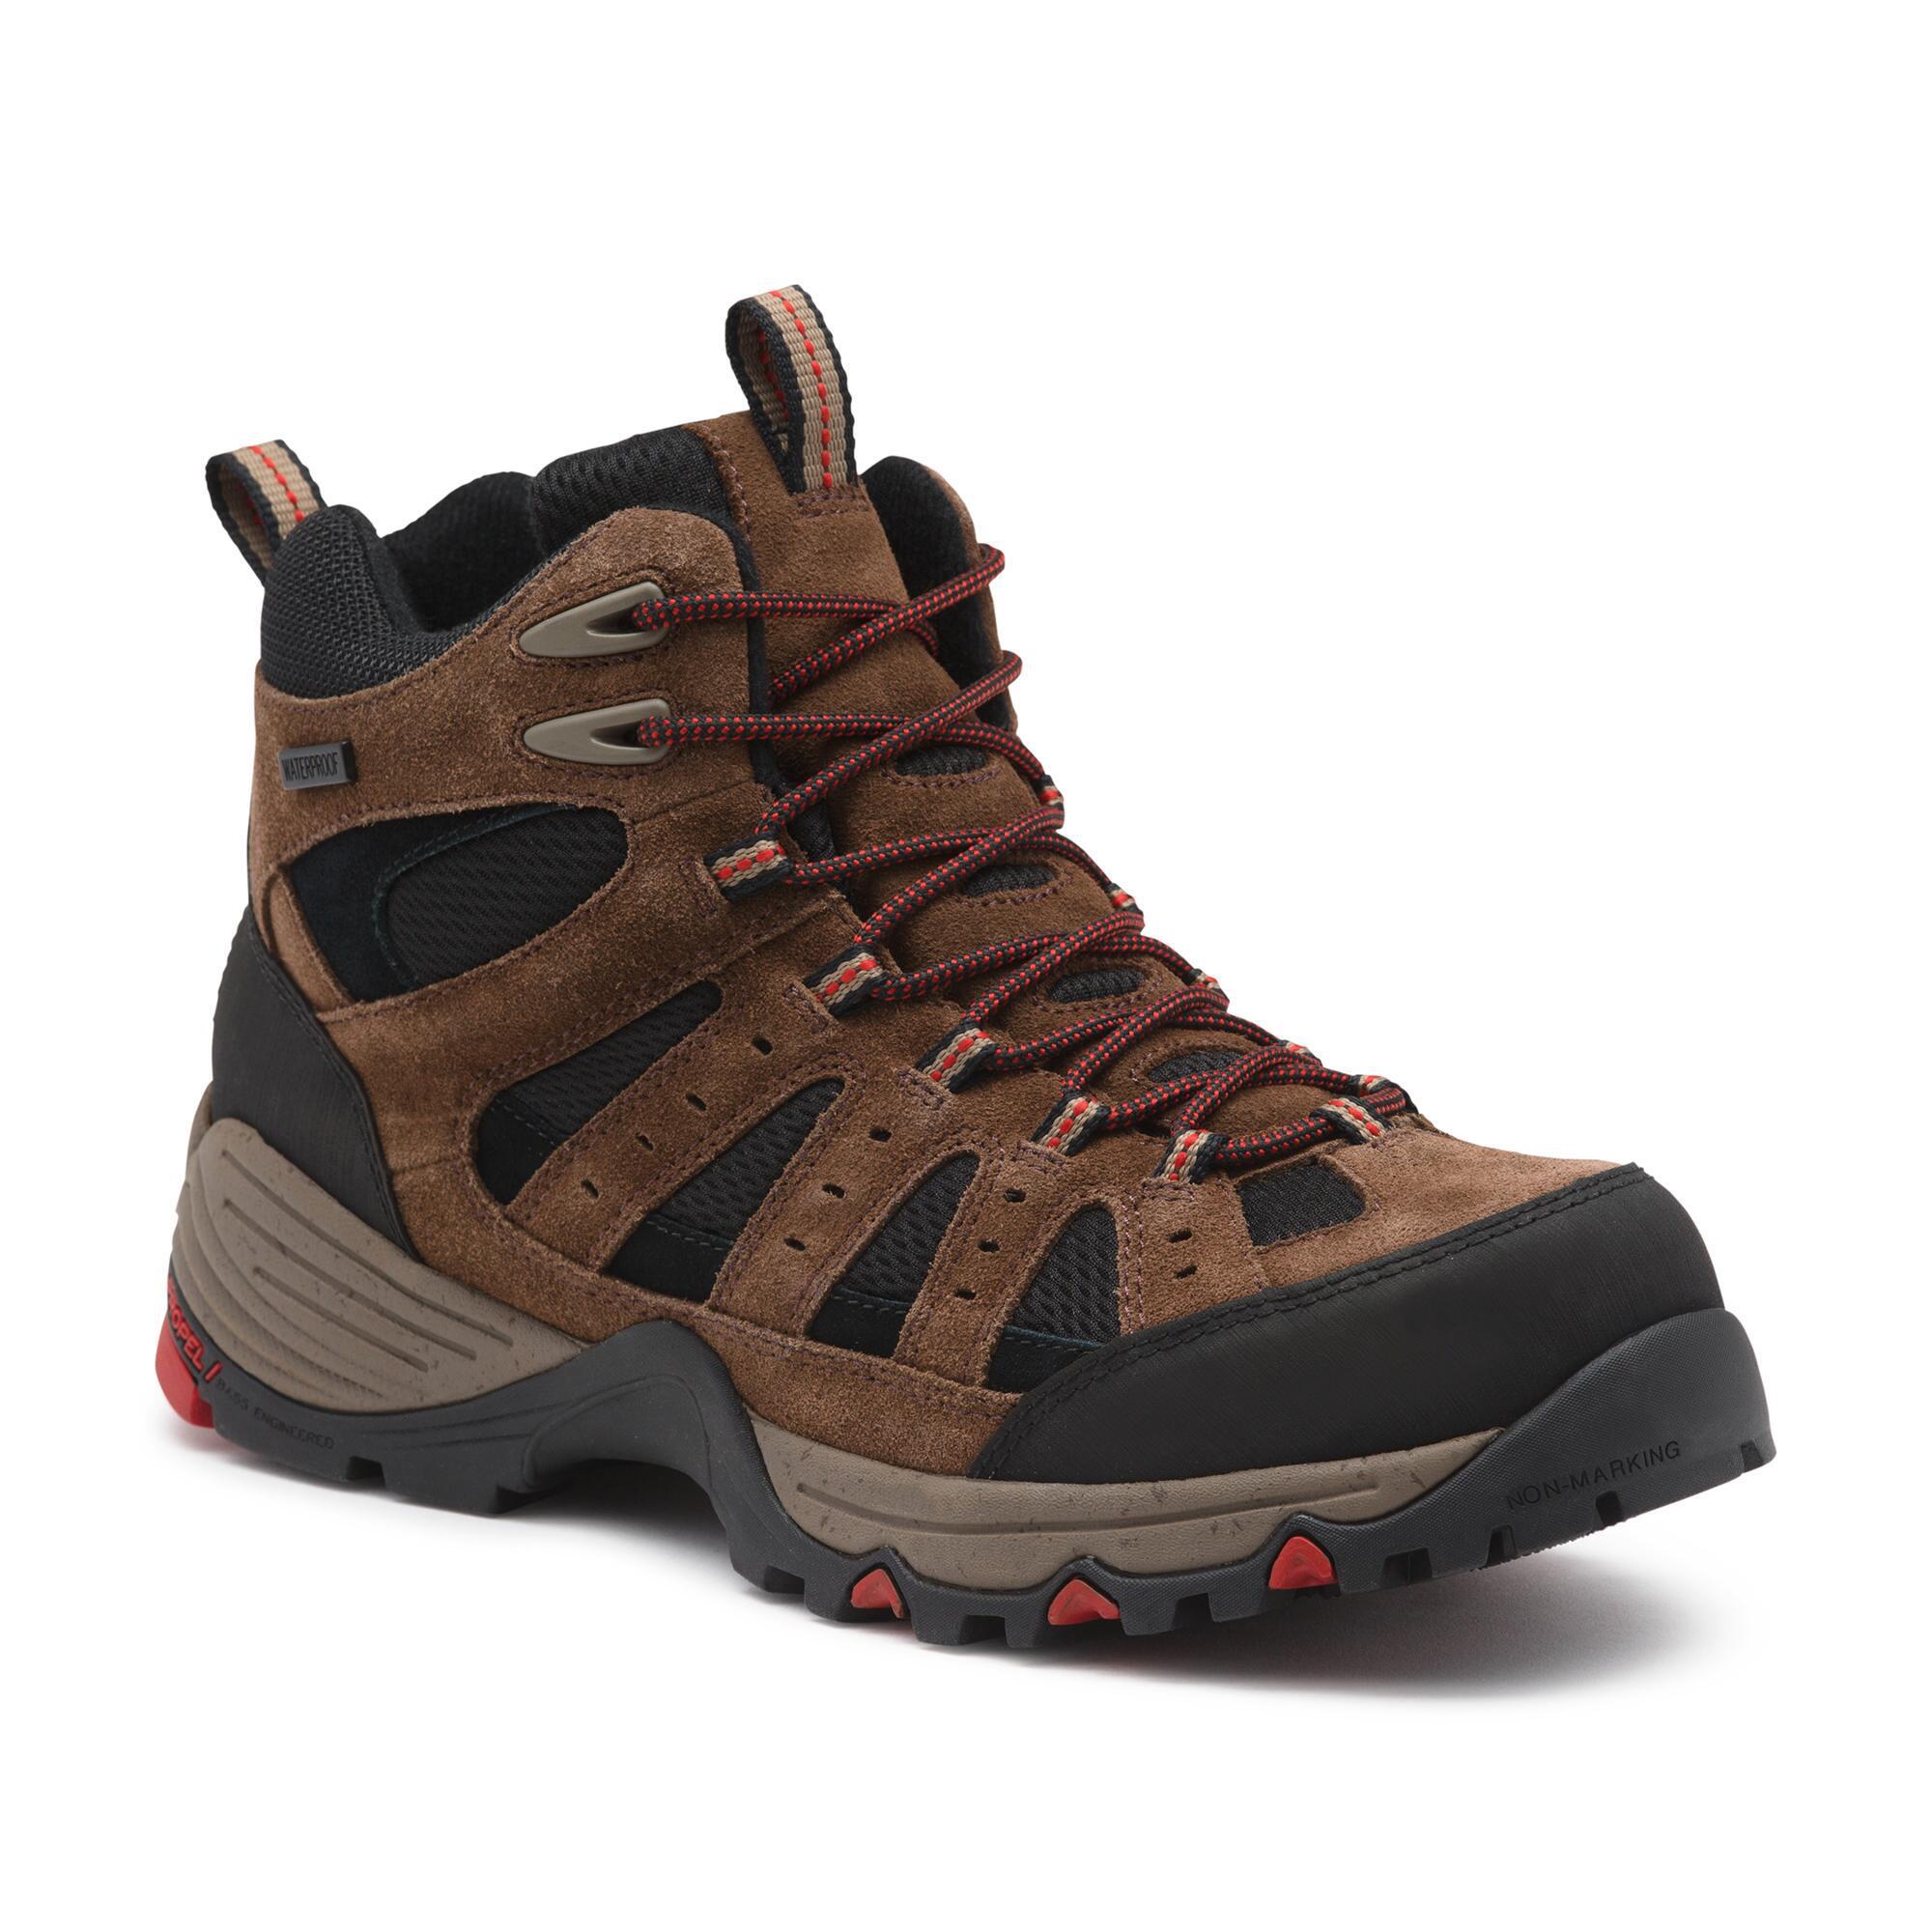 G.H.BASS Propel Trail Tour Hiking Boot in Brown for Men - Lyst